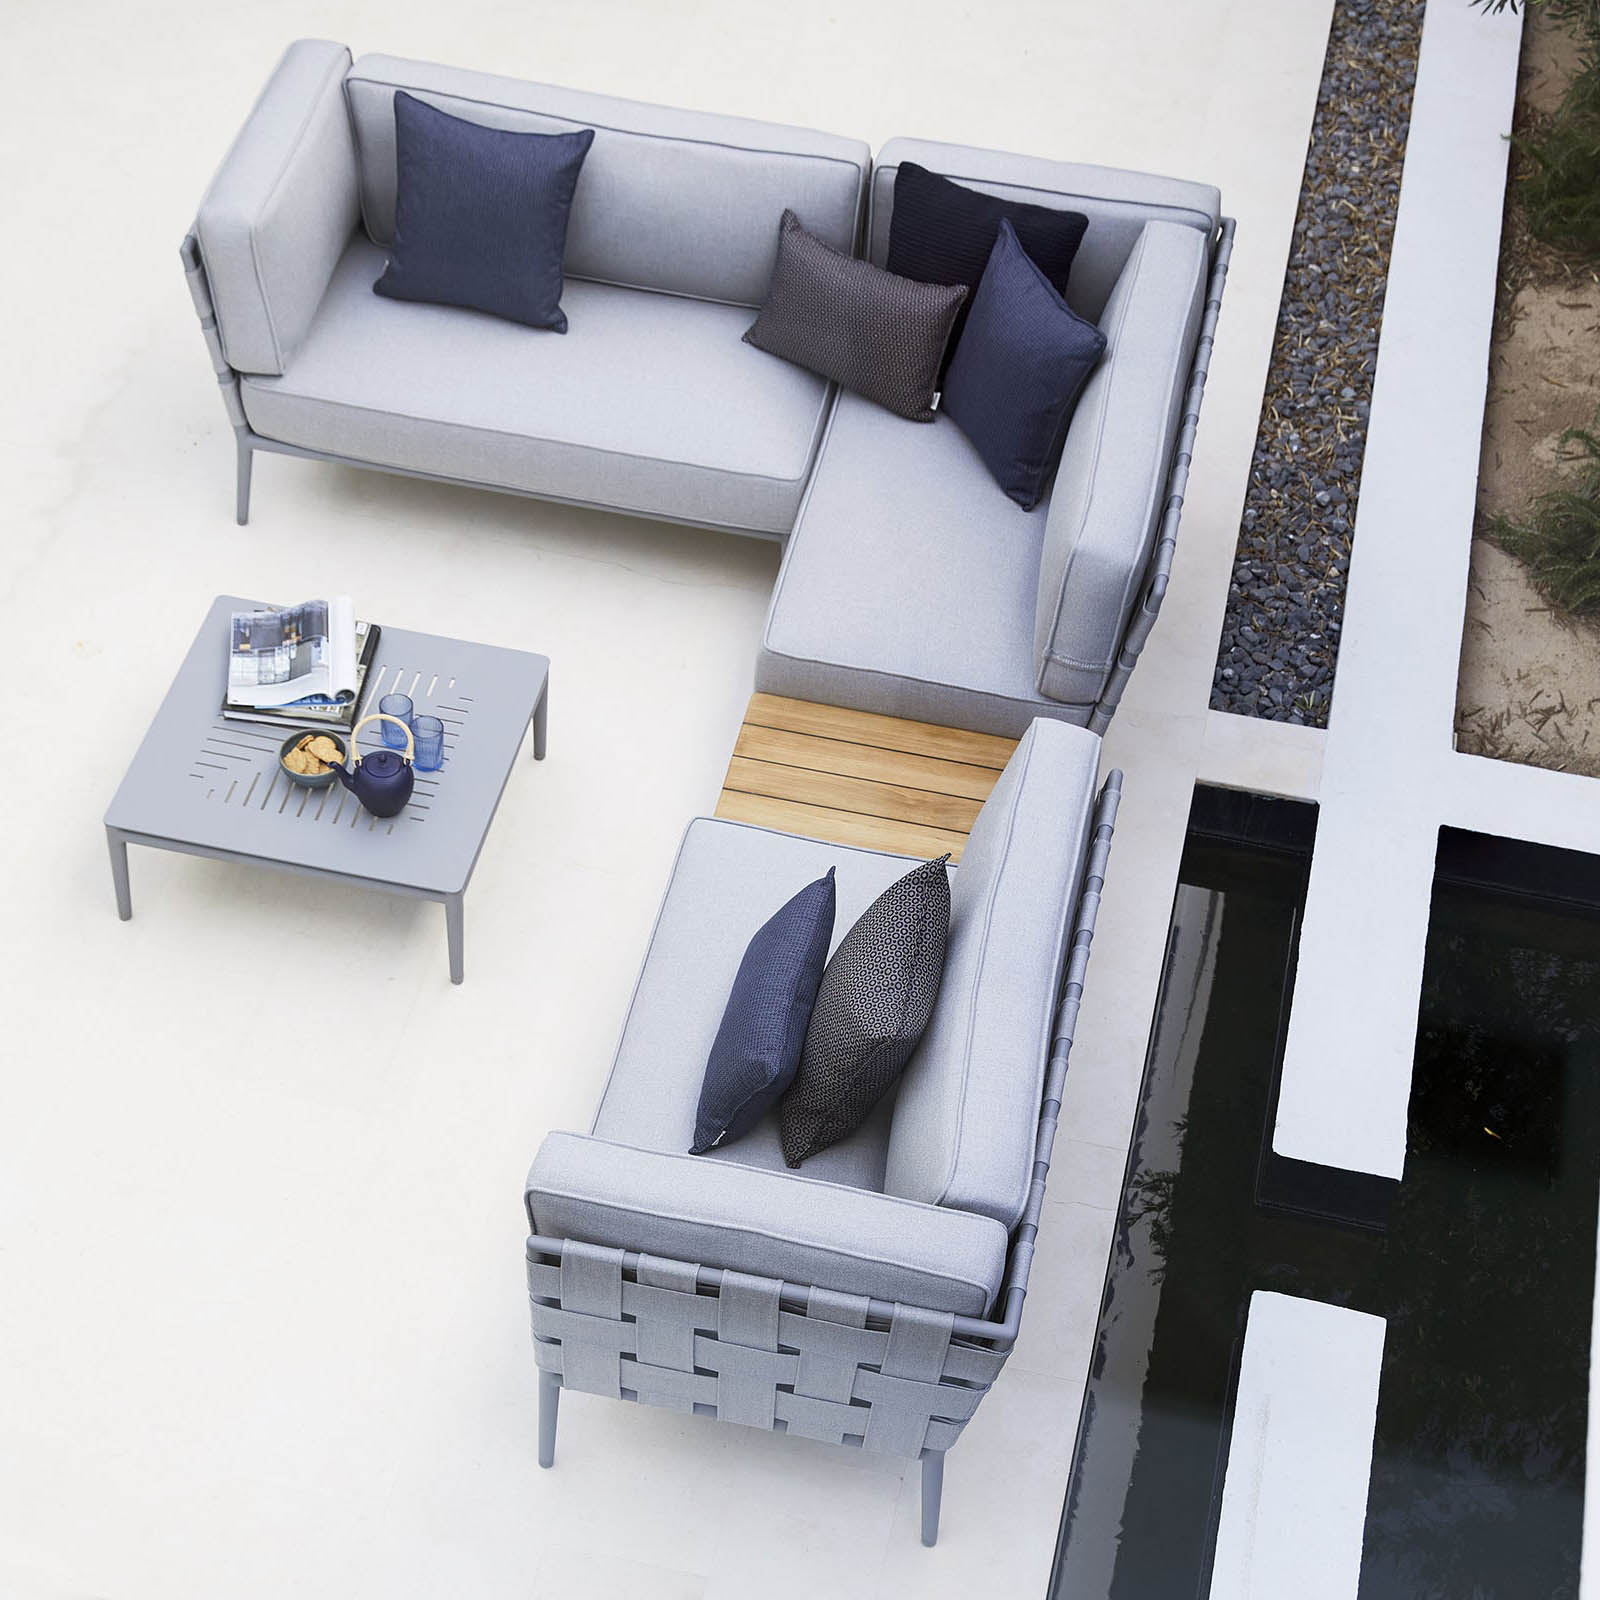 Conic 2-Sitzer Sofa-Modul rechts aus Cane-line AirTouch mit QuickDry in Light Grey